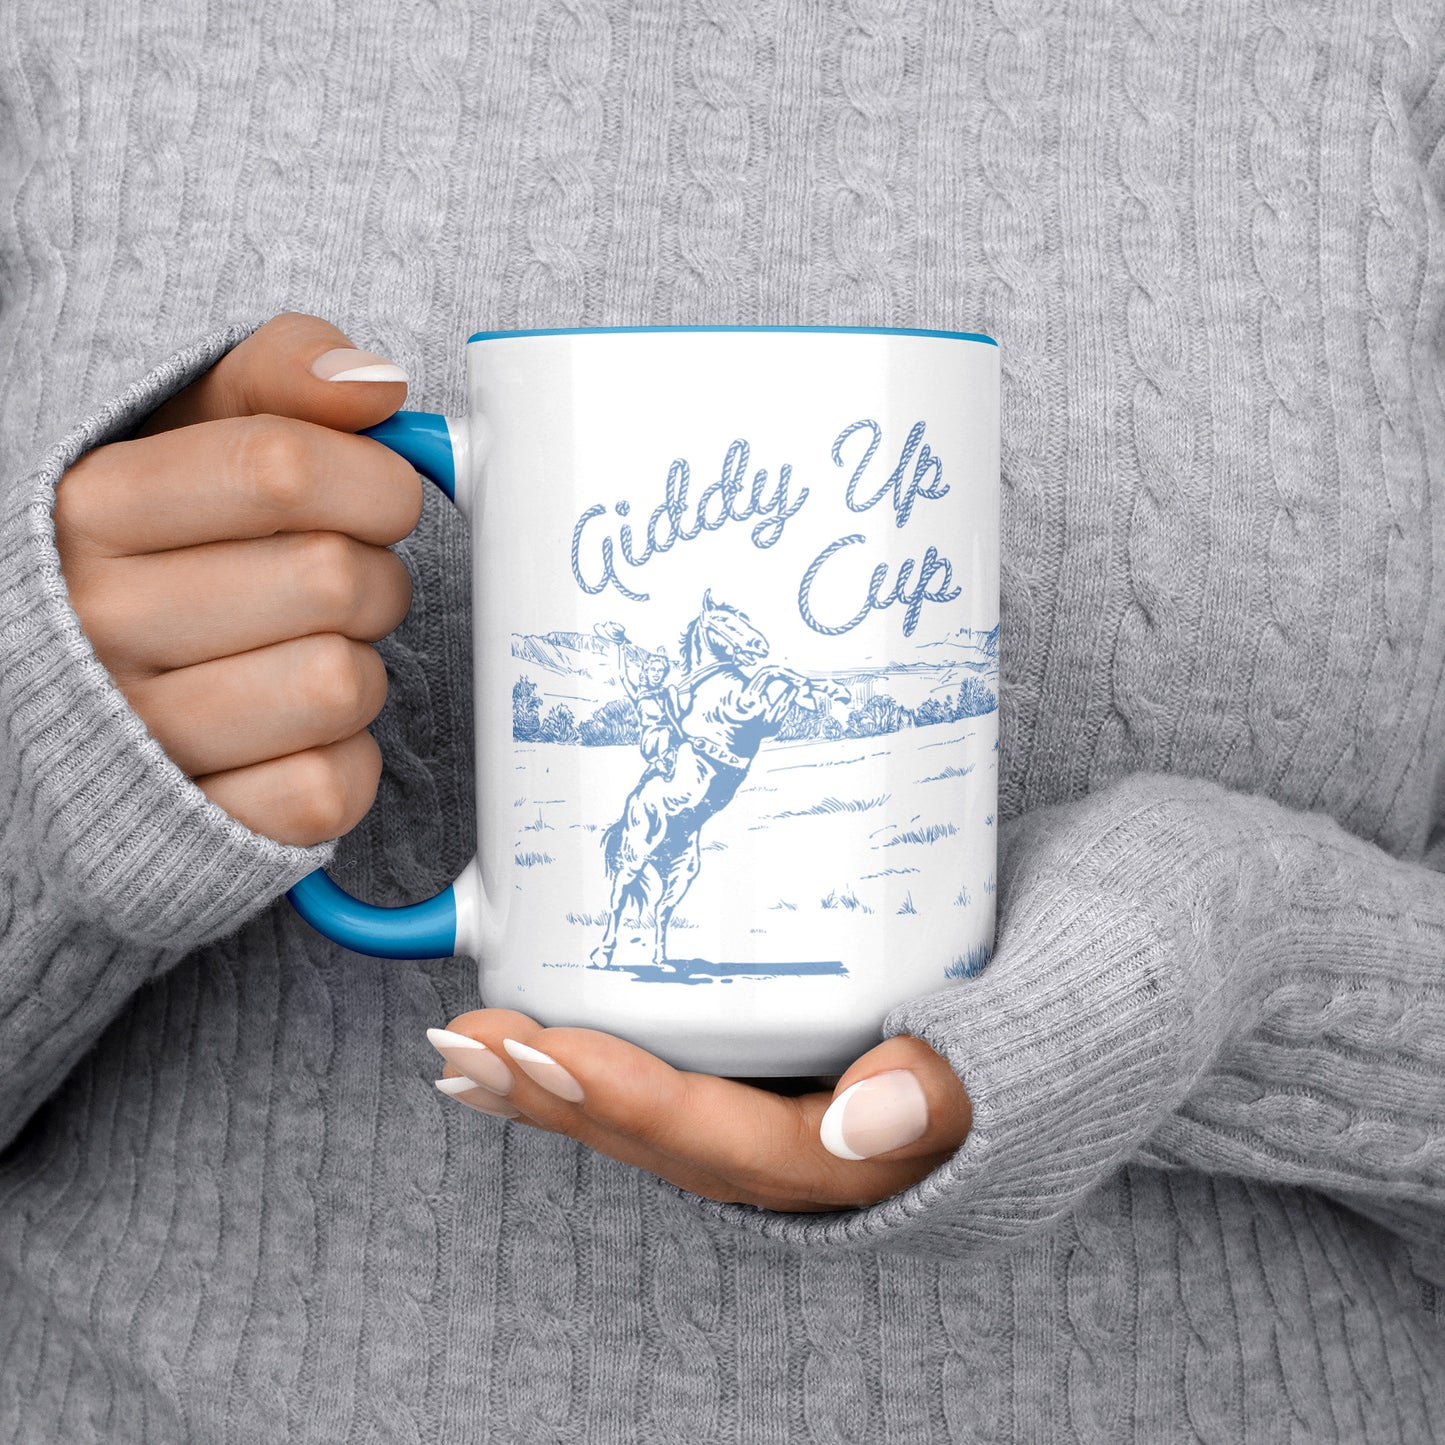 GIDDY UP CUP - BLUE HANDLE- BLUE + PURPLE ART